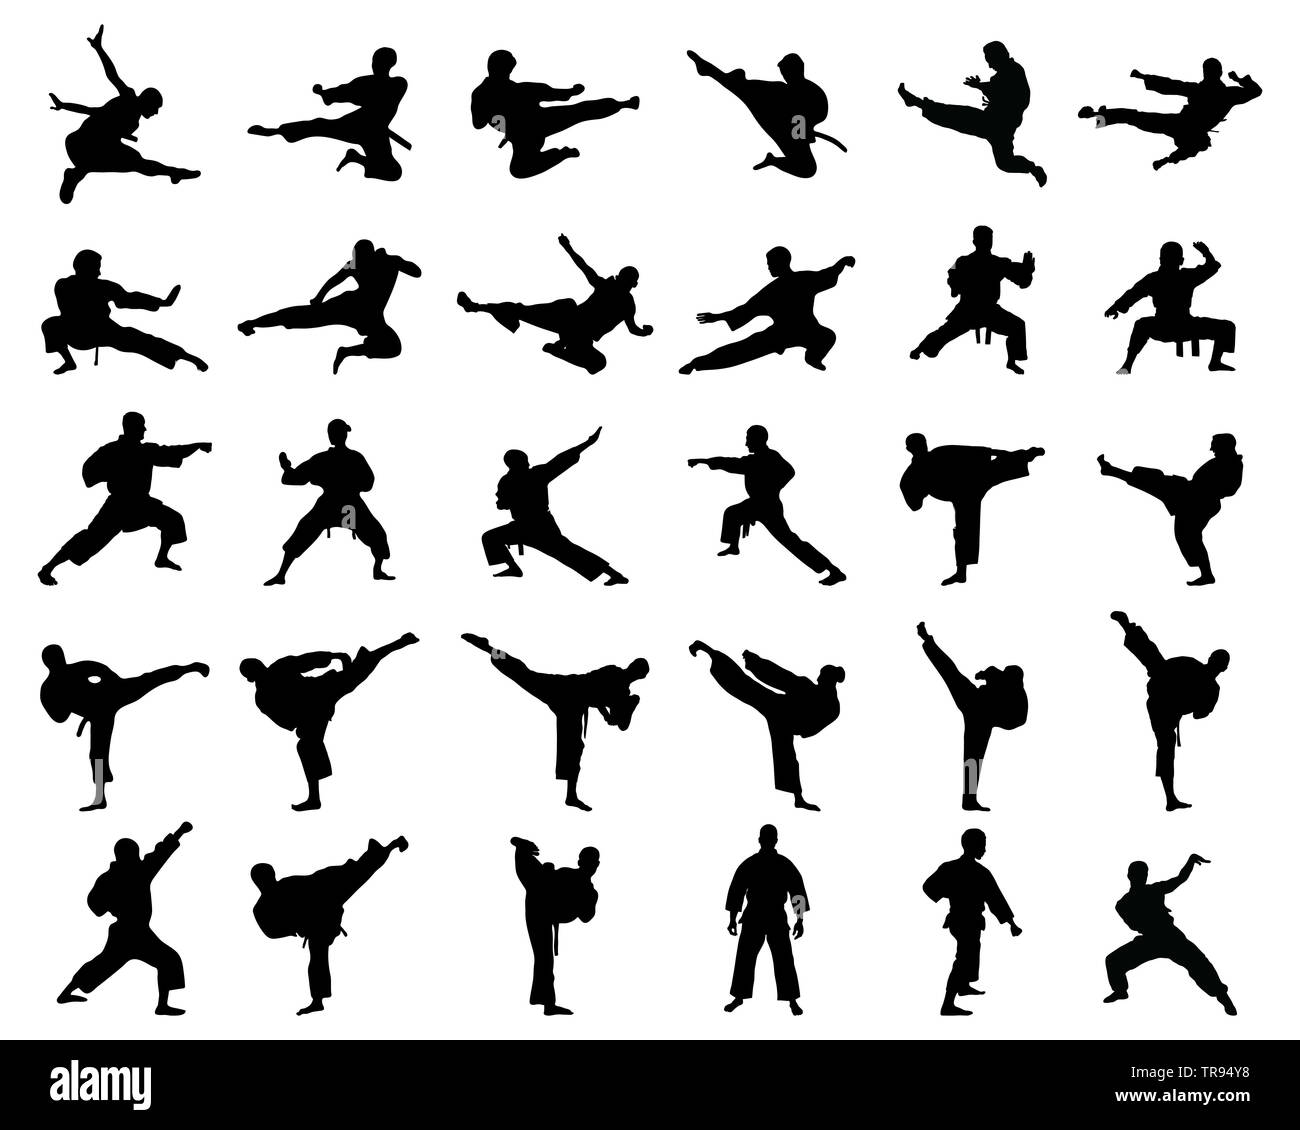 Black silhouettes of karate fighting on a white background Stock Photo